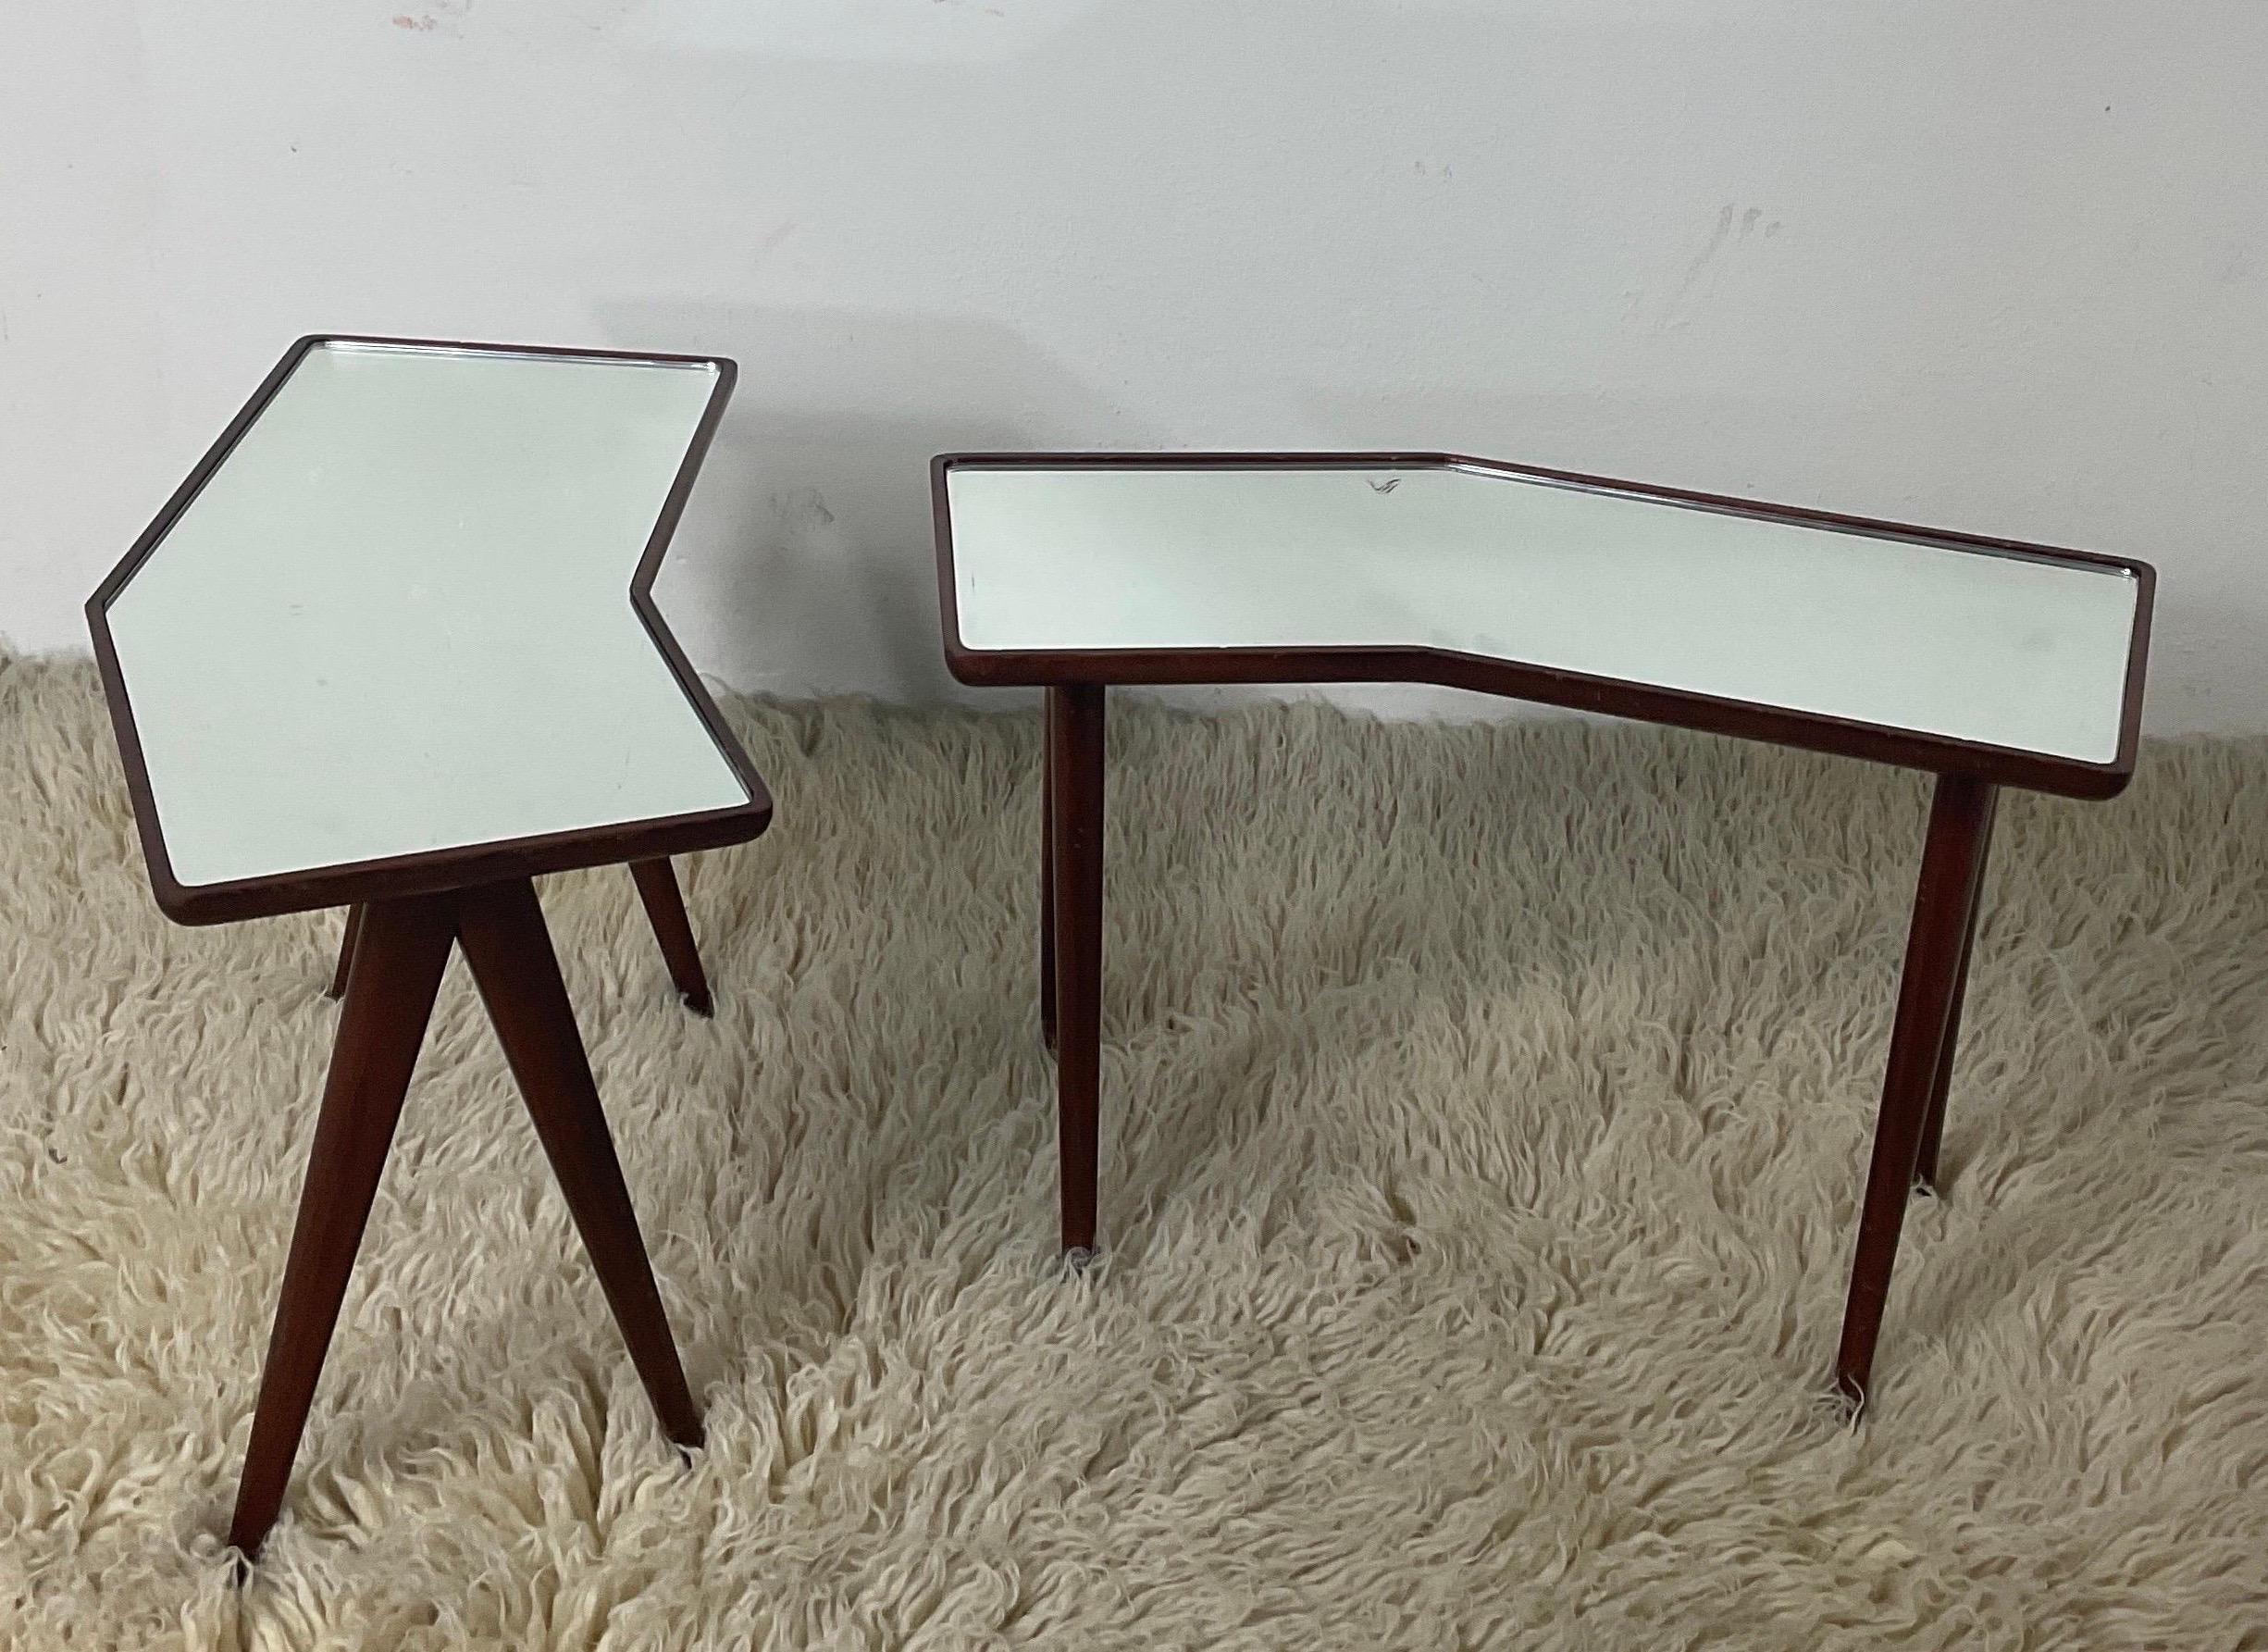 Pair of side tables by Gio Ponti for Fontana Arte, 1950s For Sale 1